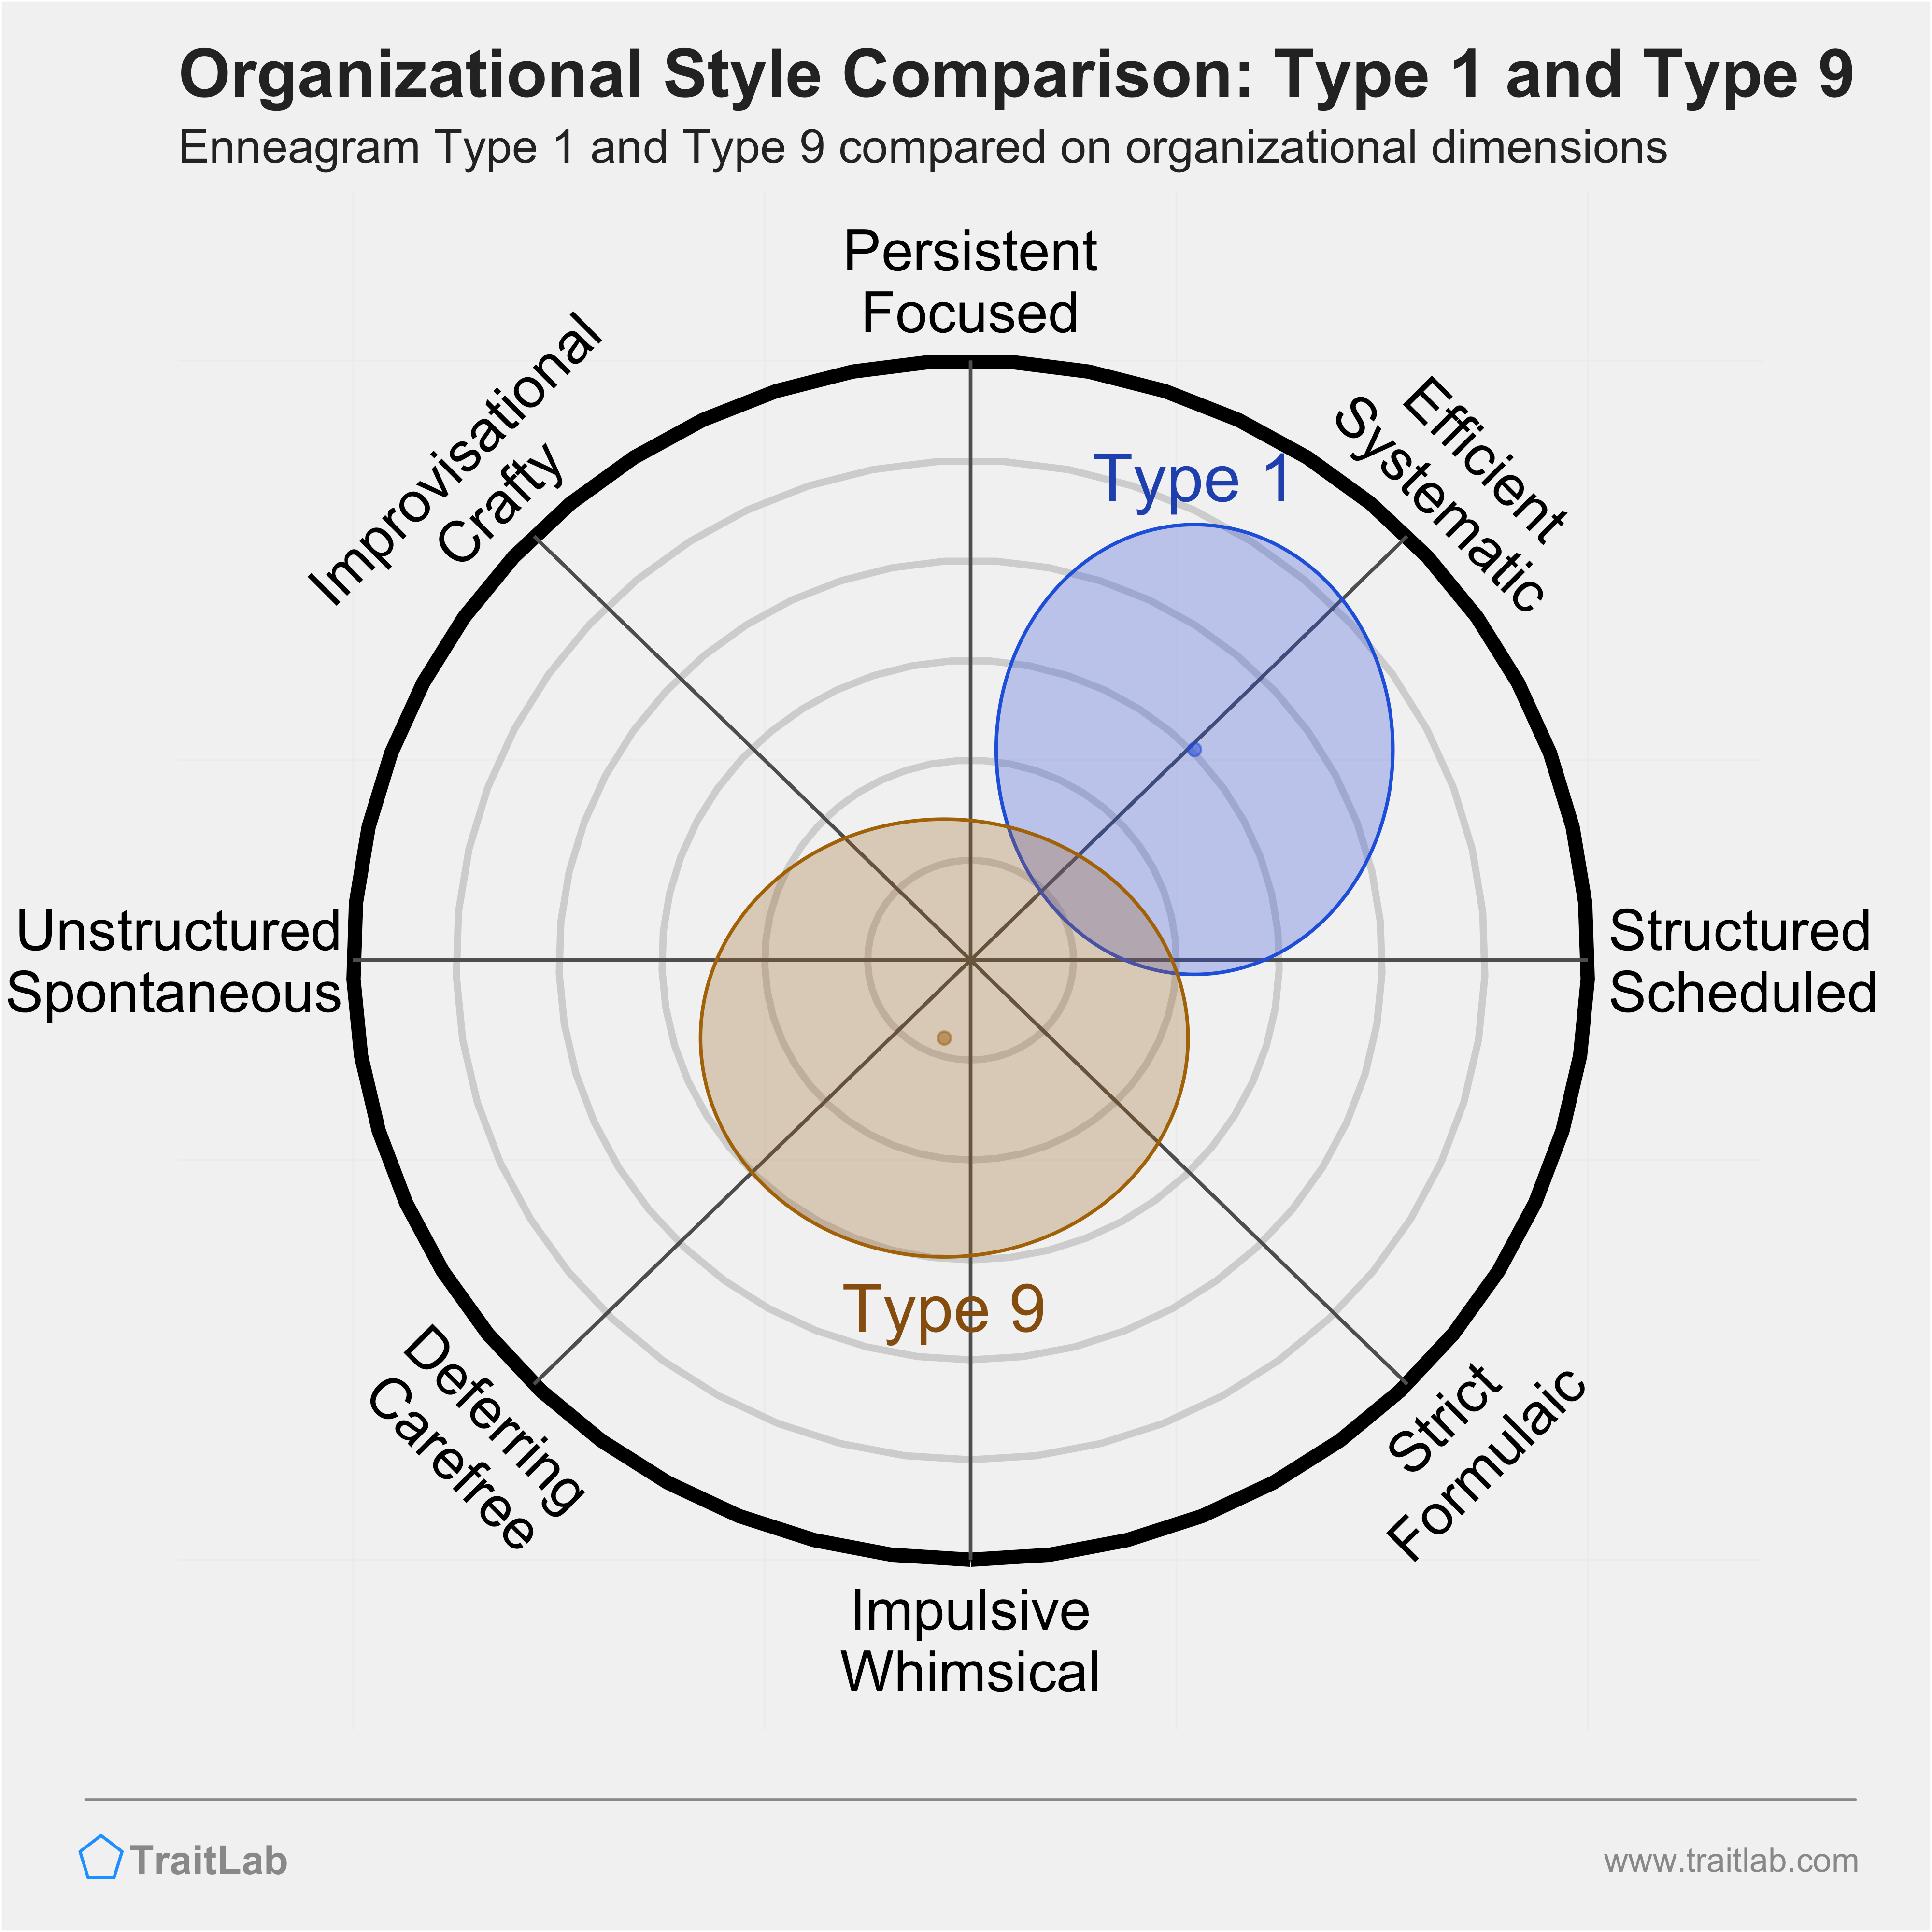 Type 1 and Type 9 comparison across organizational dimensions